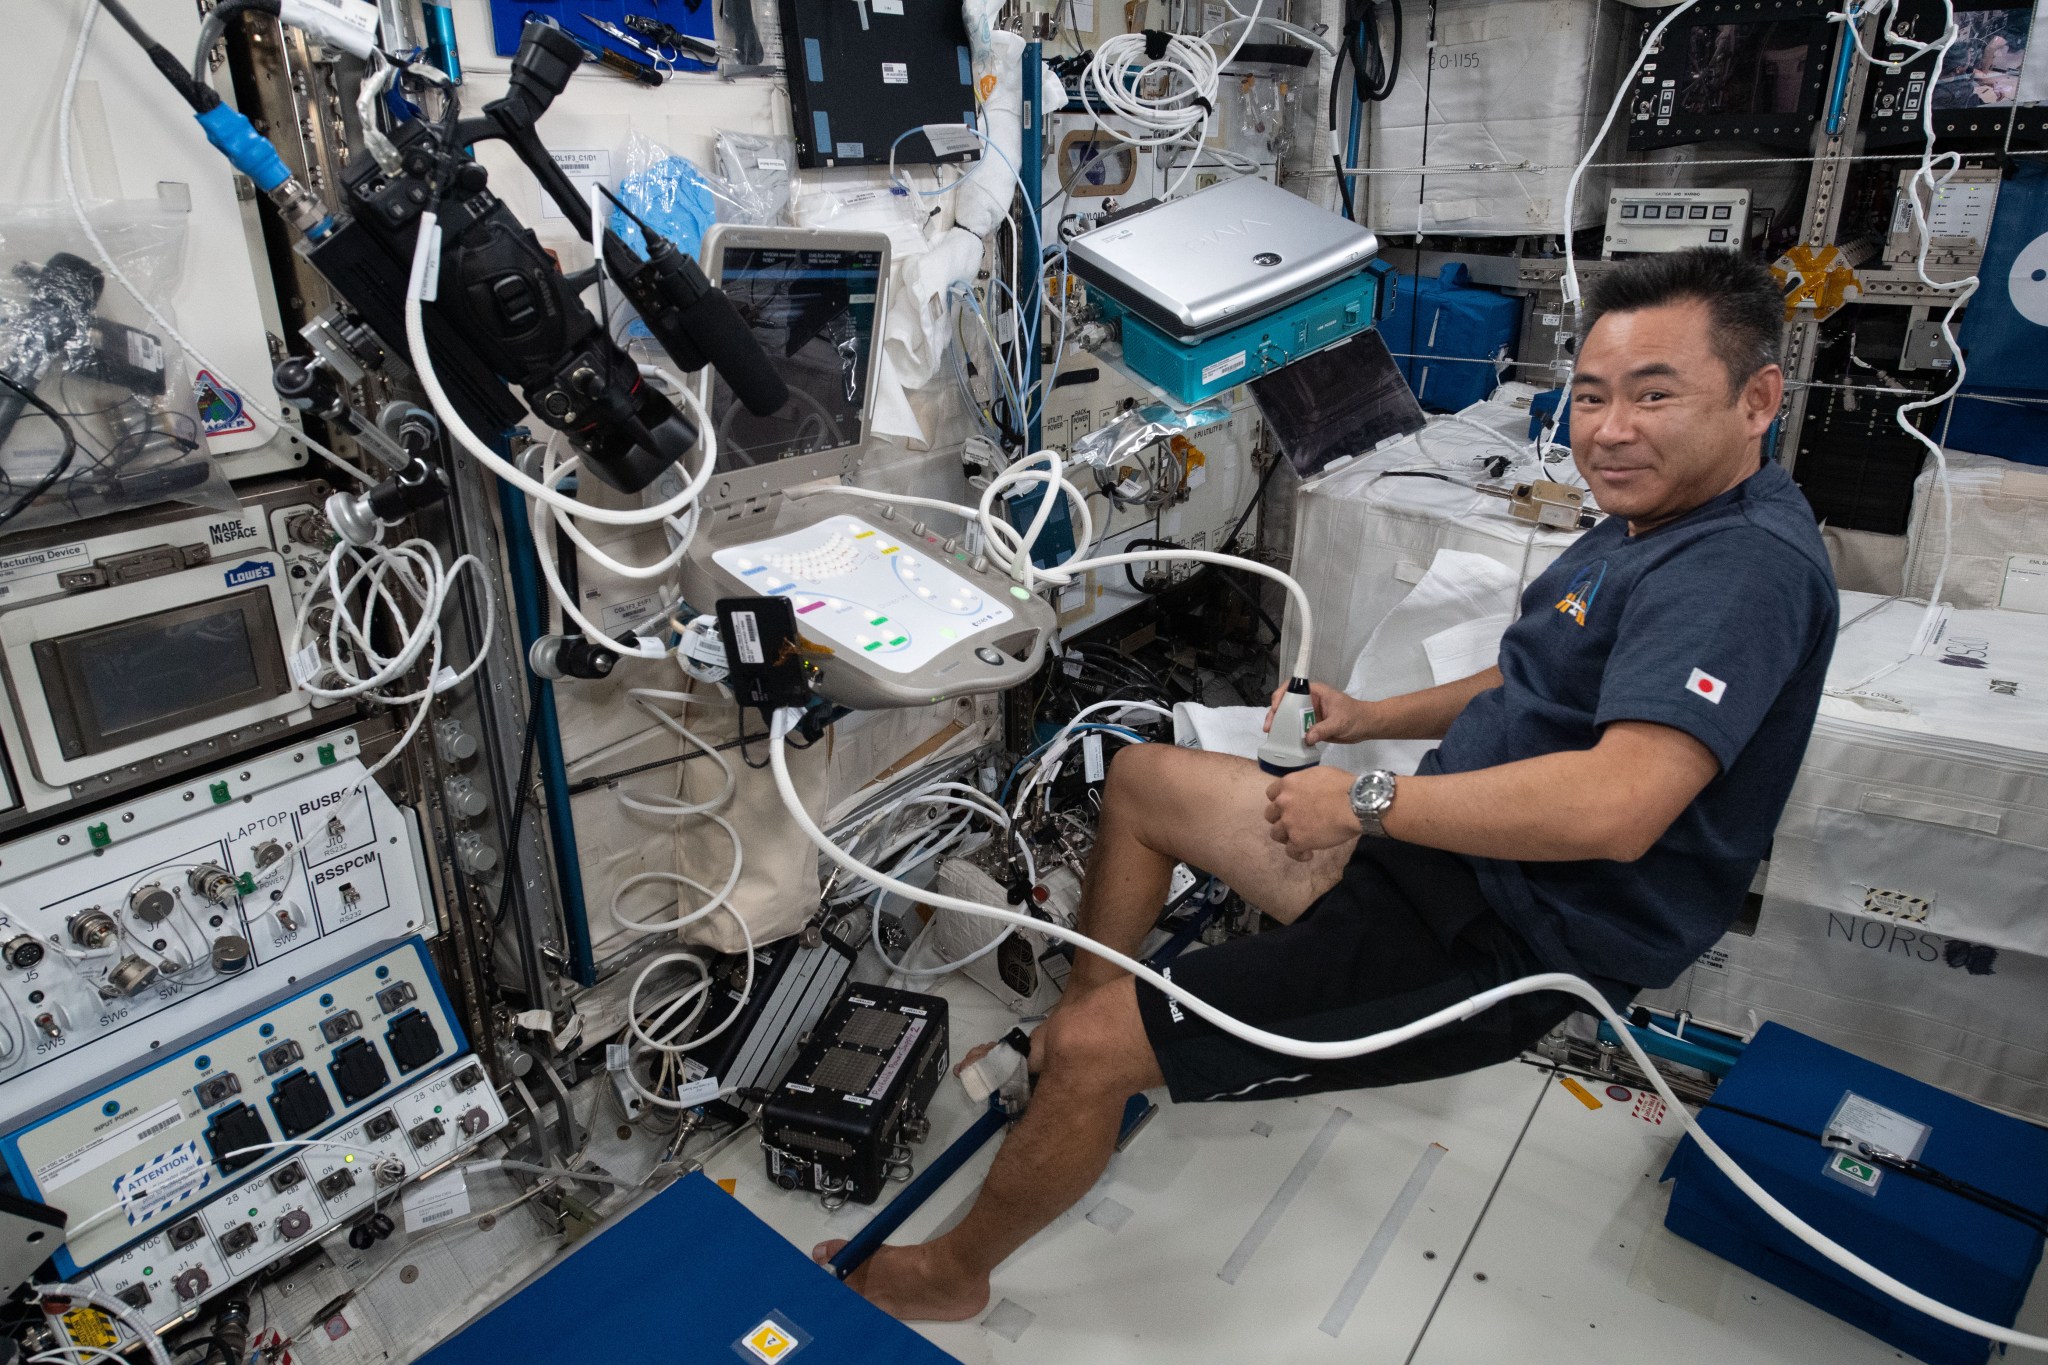 Expedition 65 Commander Akihiko Hoshide of the Japan Aerospace Exploration Agency scans the femoral artery in his right leg with an ultrasound device for the Vascular Aging study.